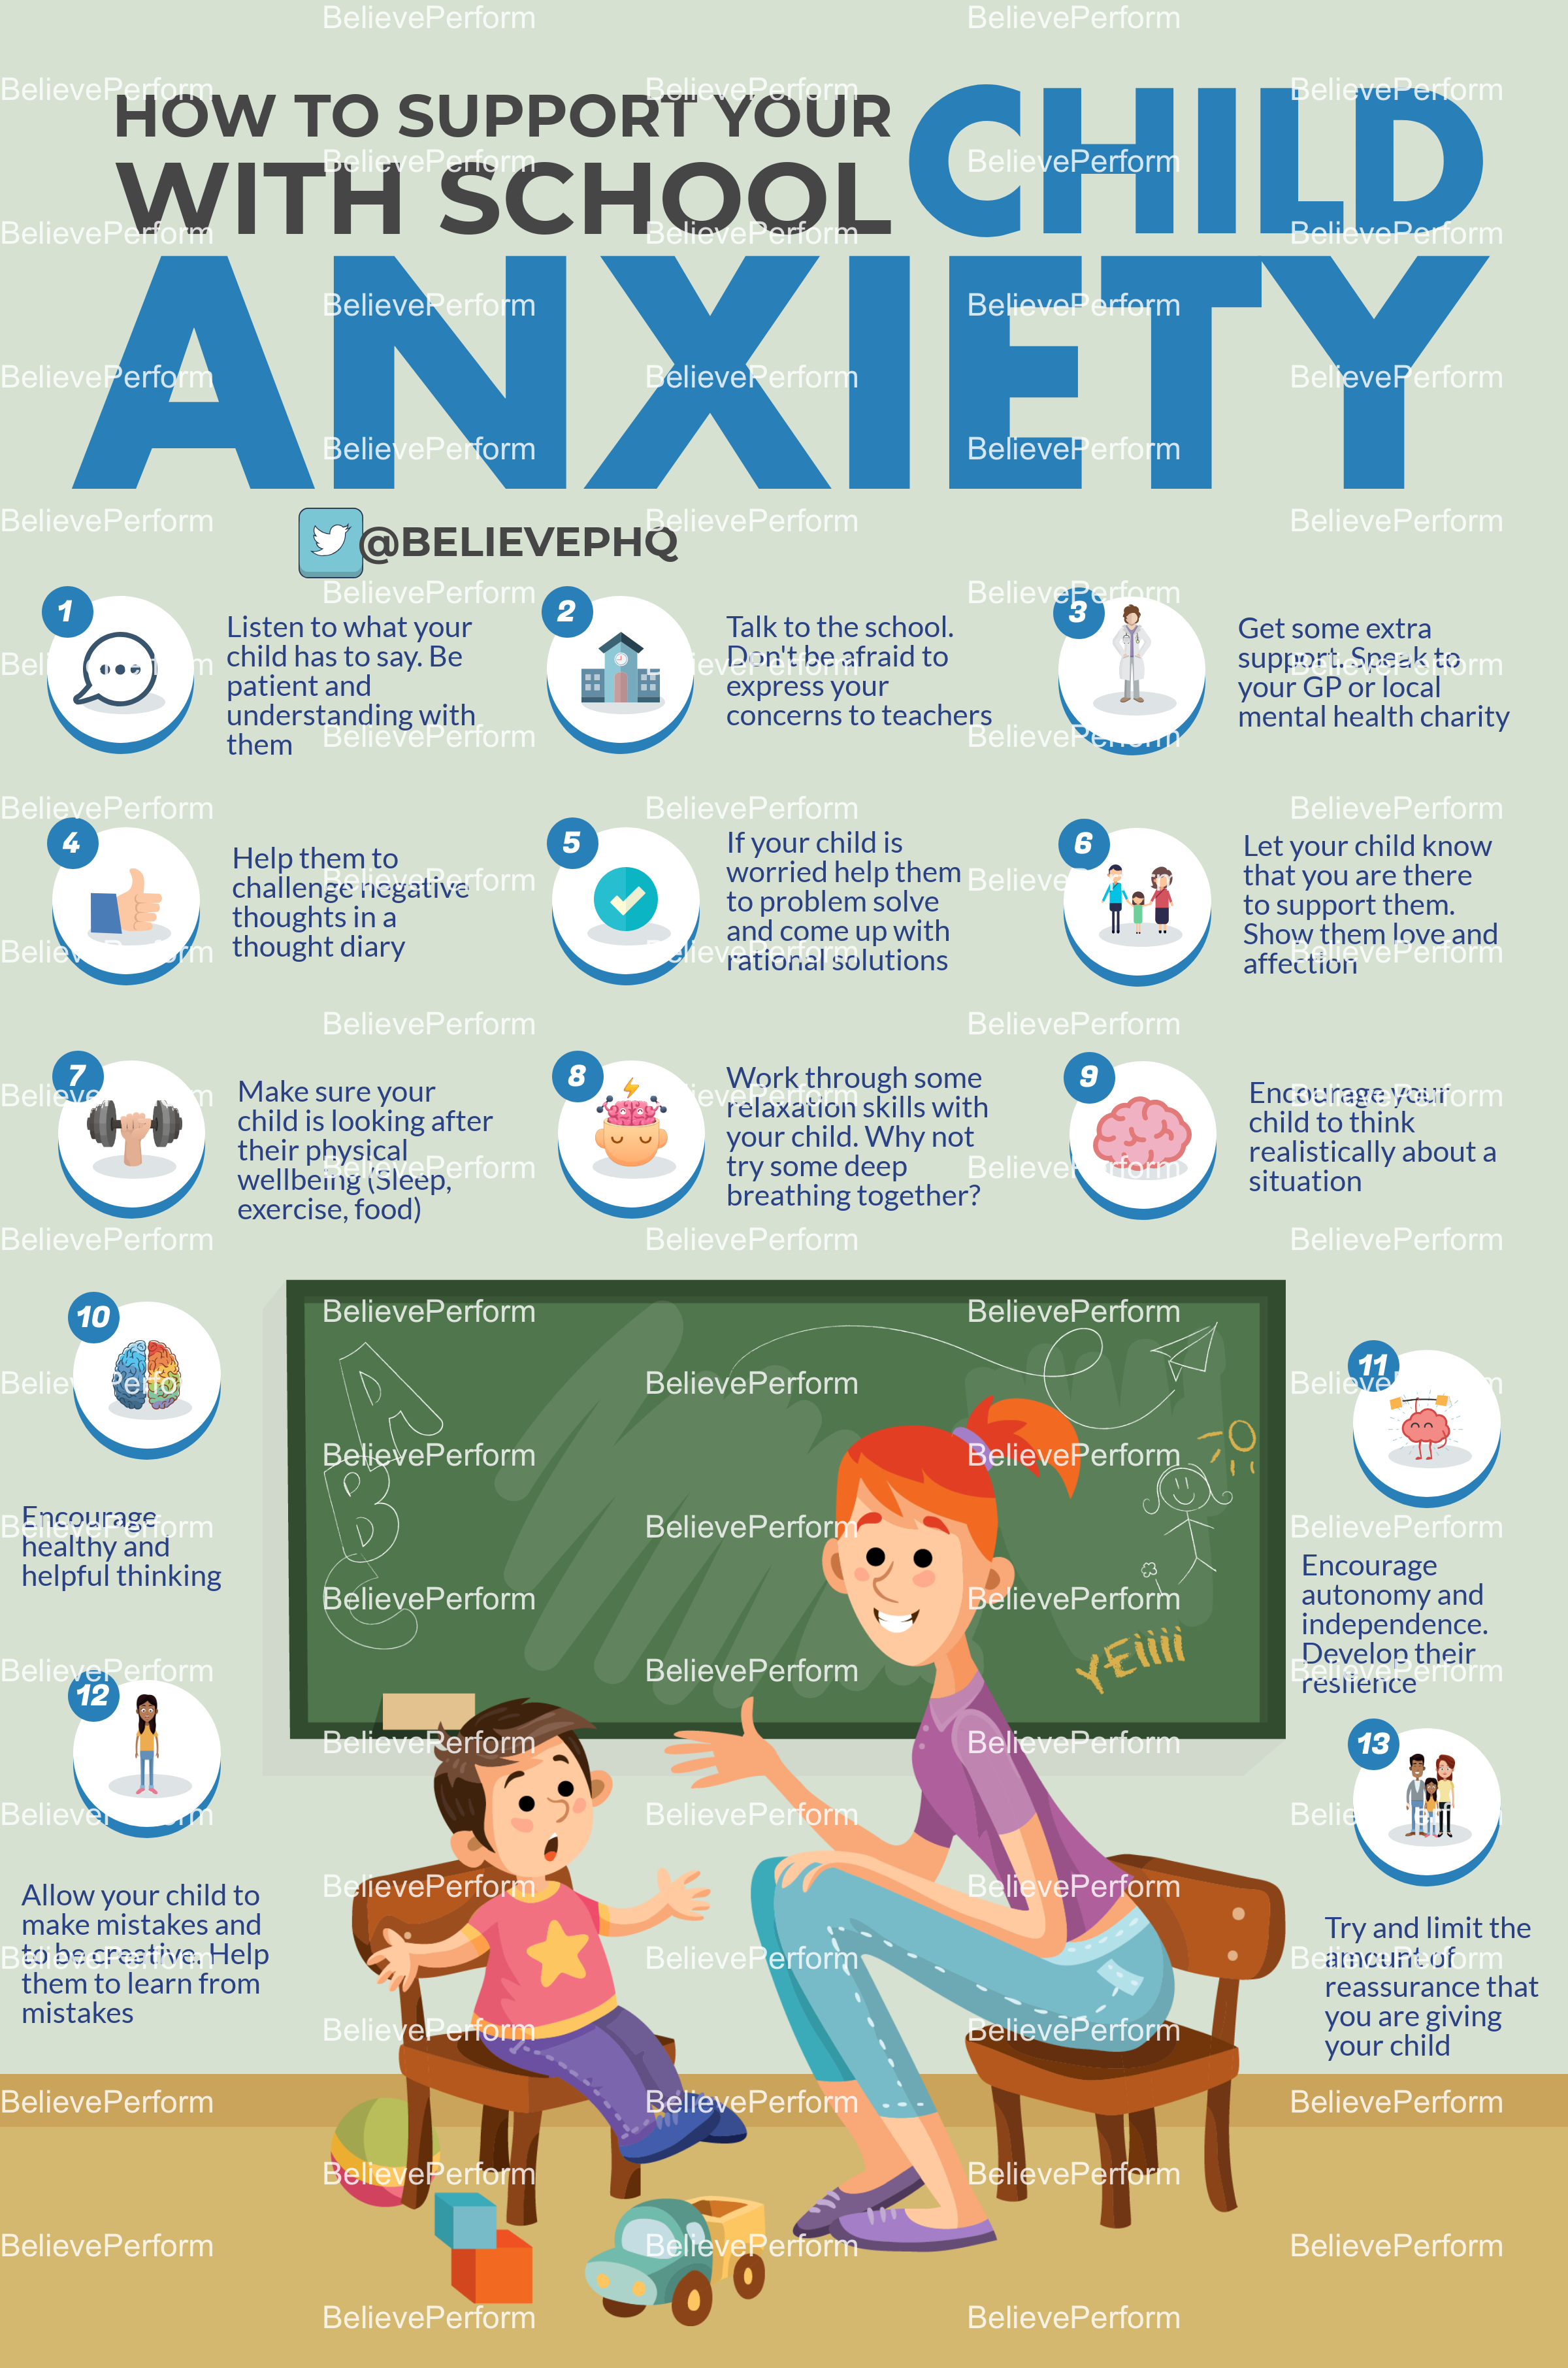 How to support your child with school anxiety